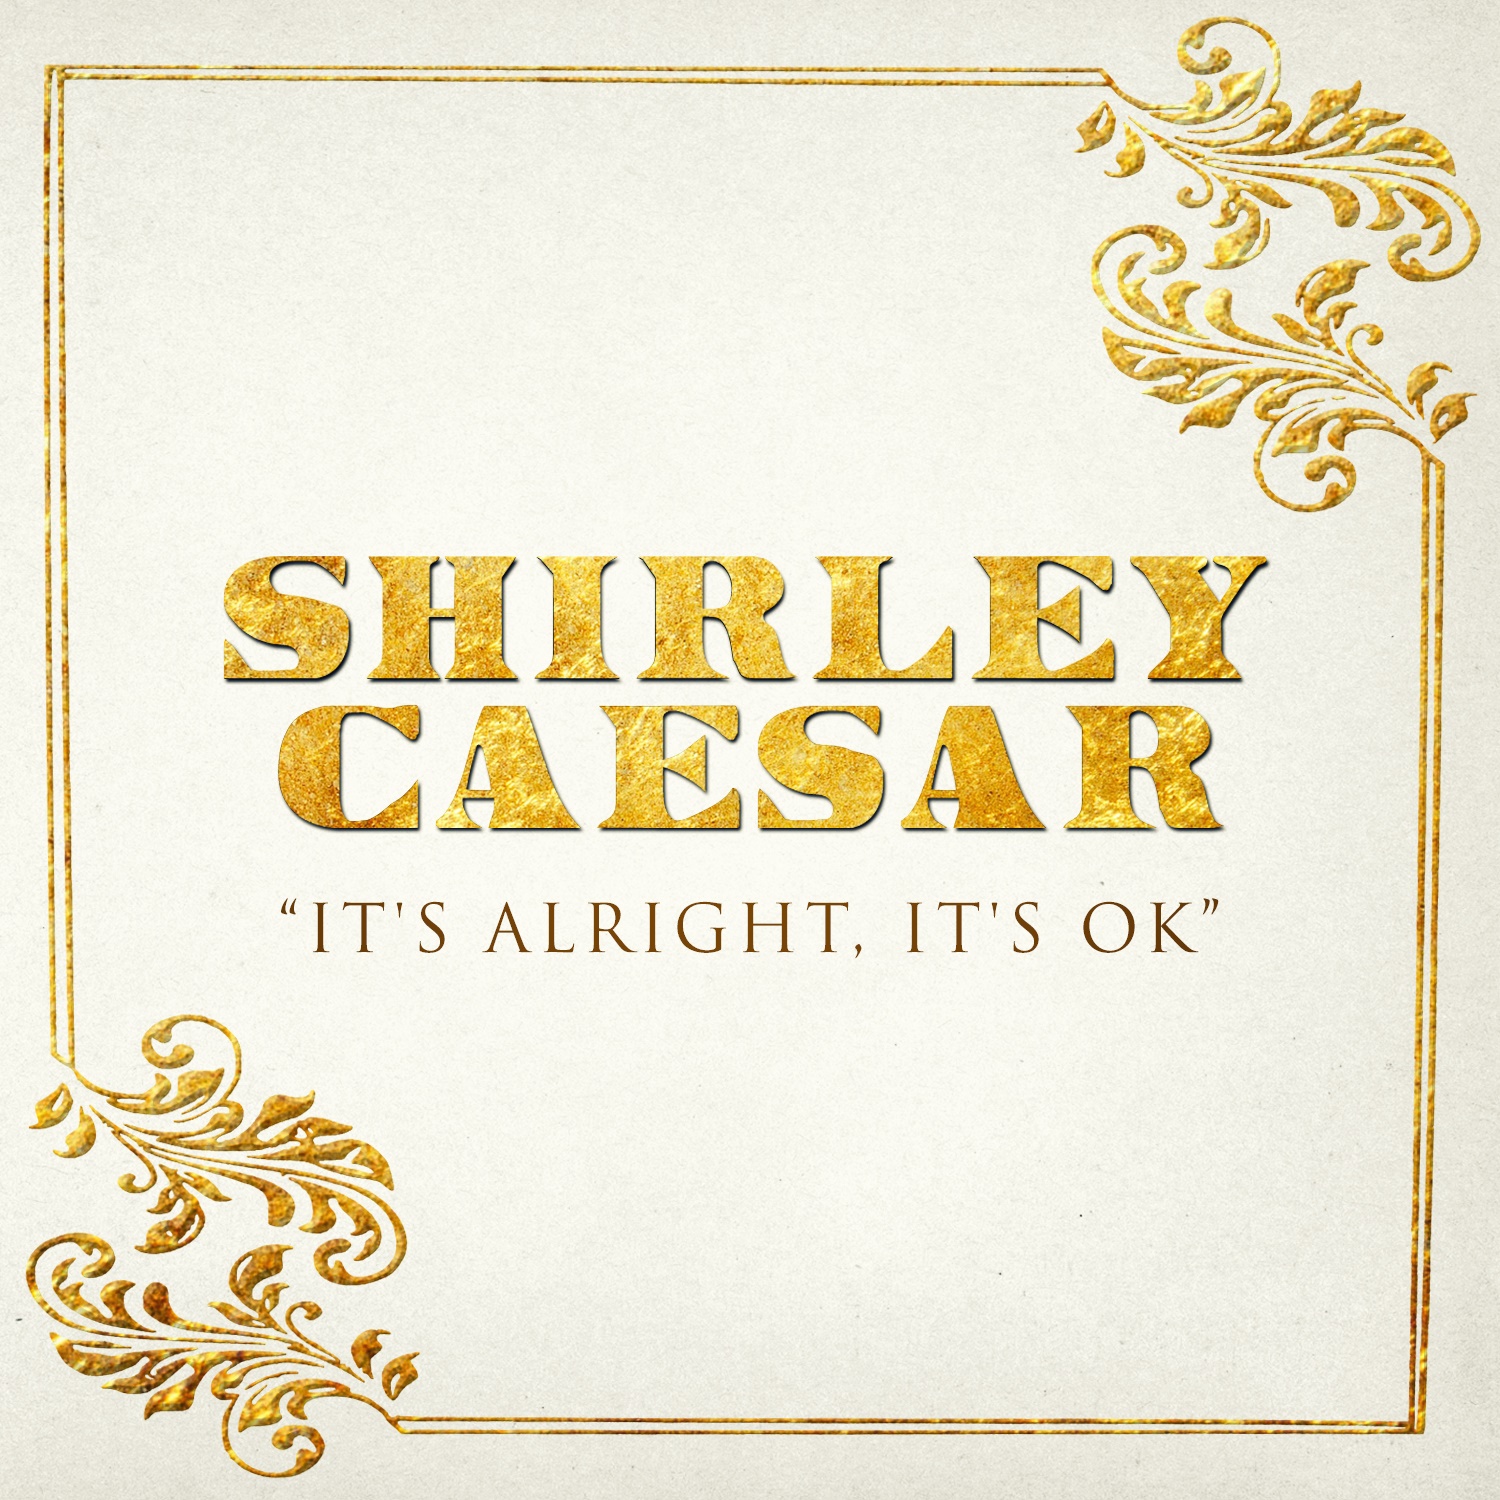 Anthony Hamilton Joins Gospel Legend Shirley Caesar on New Song "It's Alright, It's Ok"